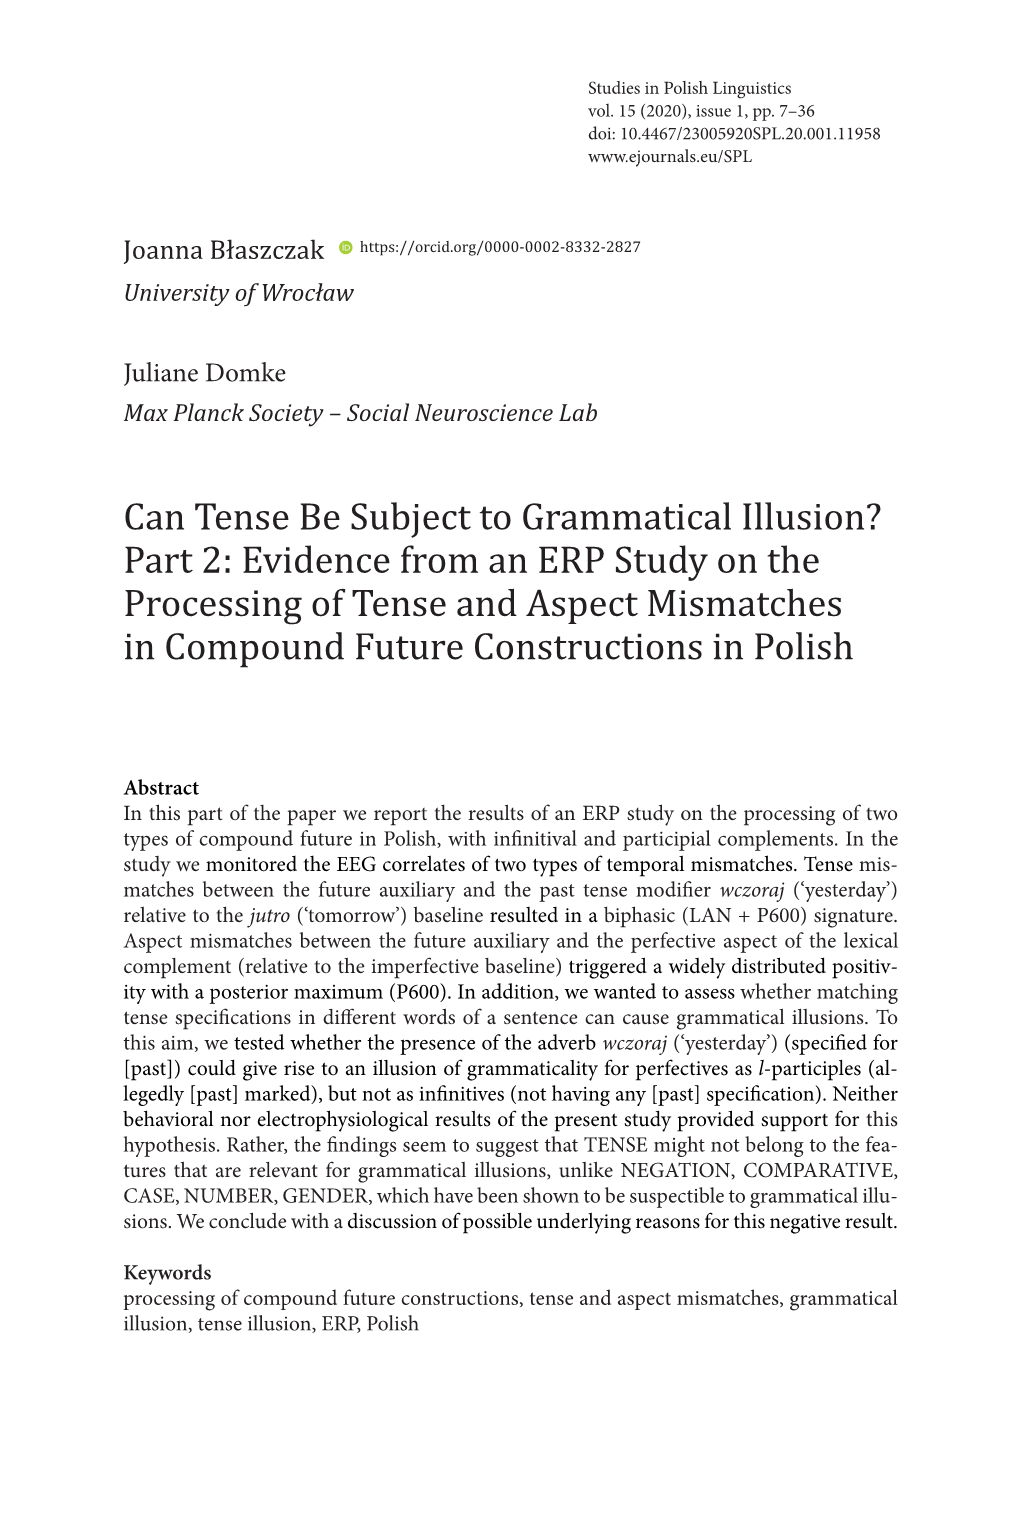 Can Tense Be Subject to Grammatical Illusion? Part 2: Evidence from An